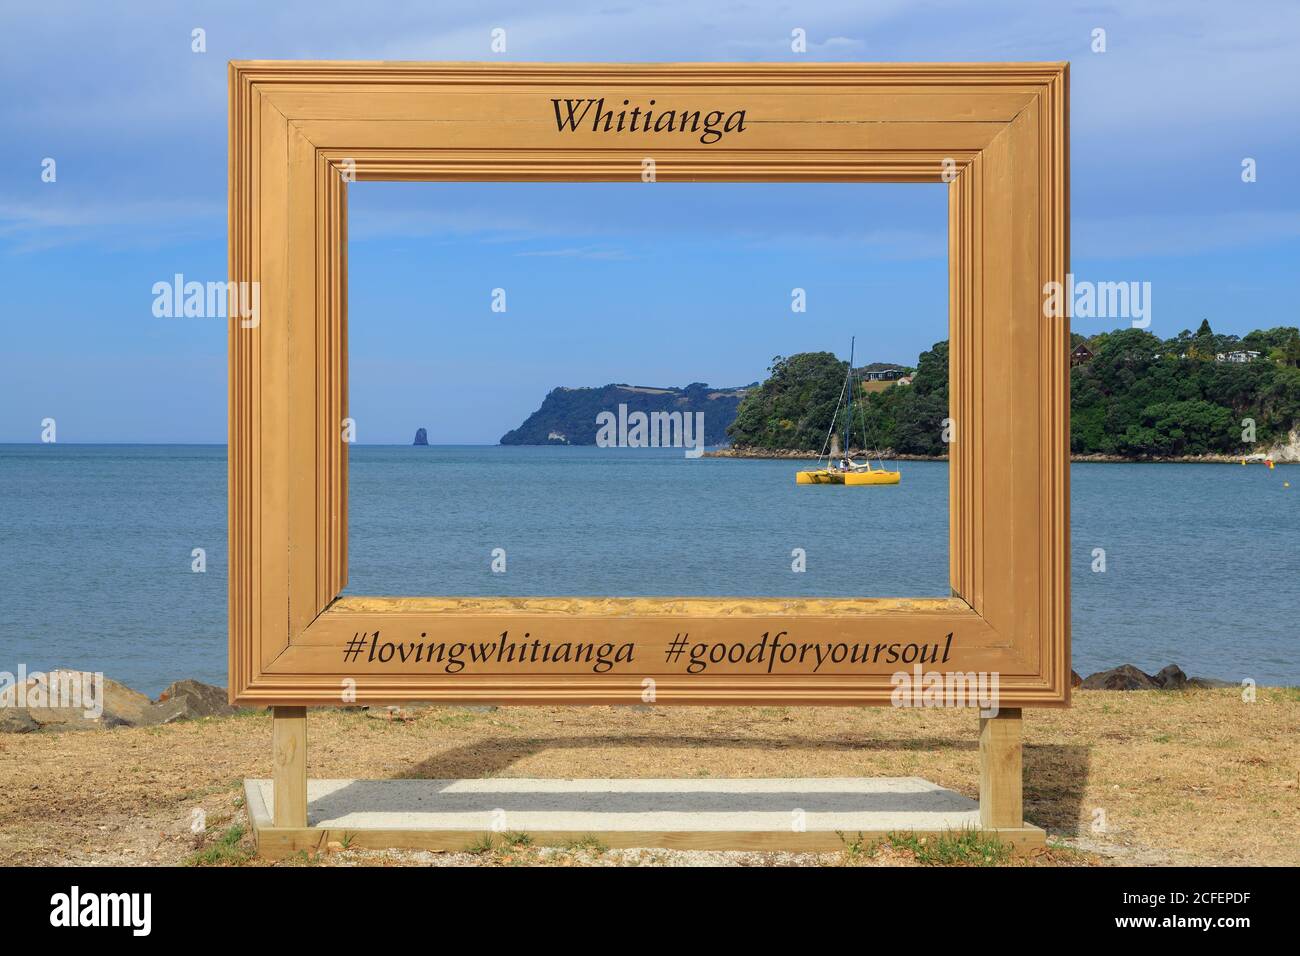 https://c8.alamy.com/comp/2CFEPDF/a-giant-frame-on-the-waterfront-in-whitianga-new-zealand-for-tourists-to-use-in-photos-2CFEPDF.jpg